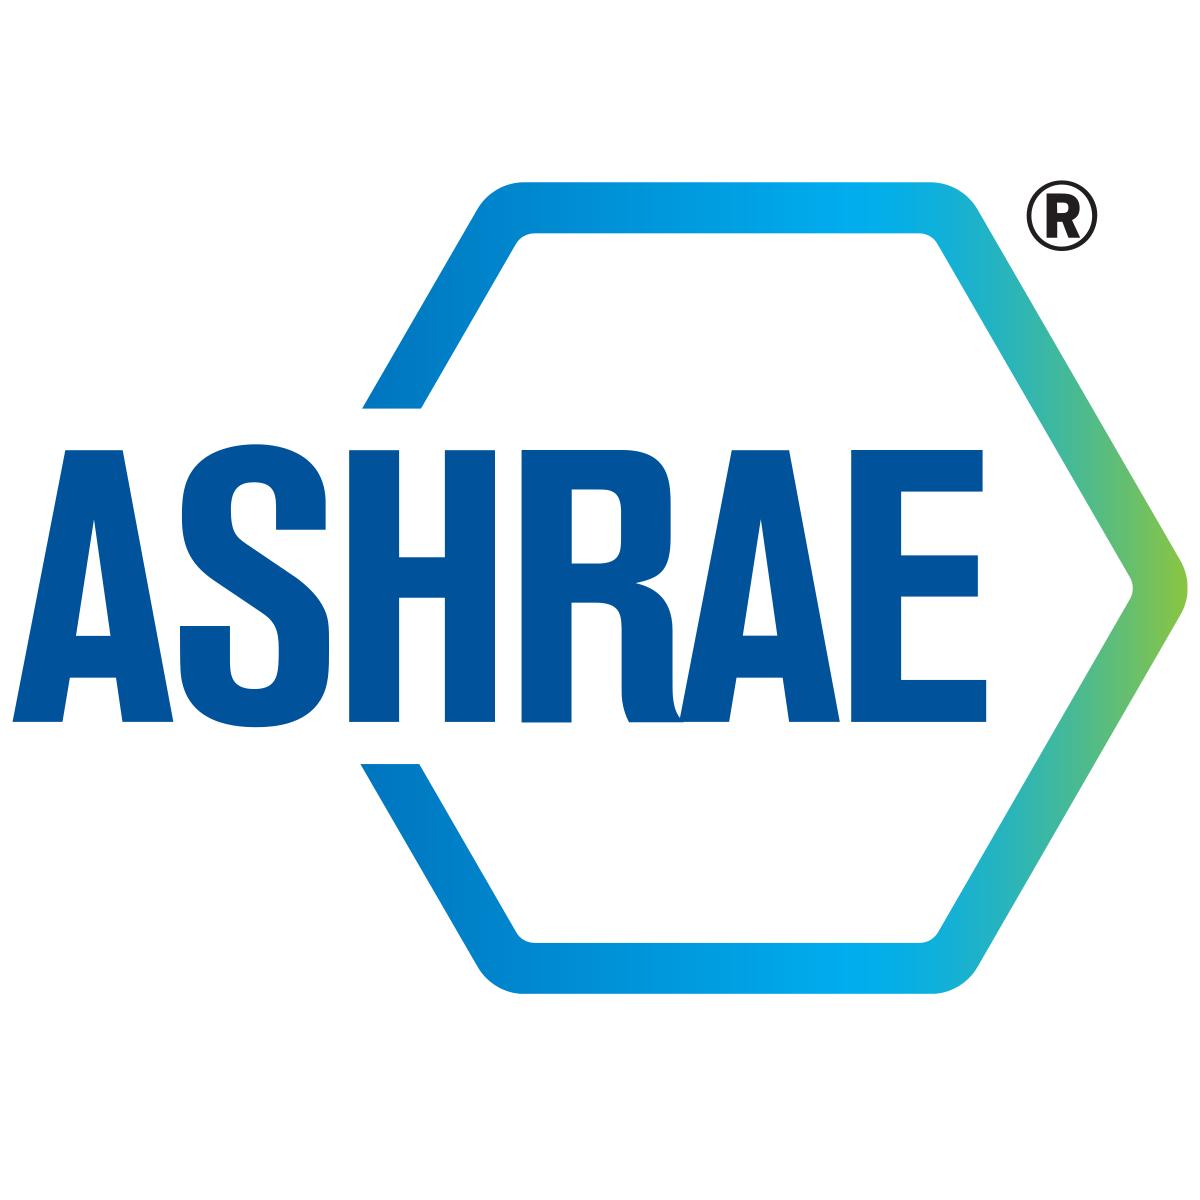 Logo with the text "ASHRAE" with a hexagon behind the name